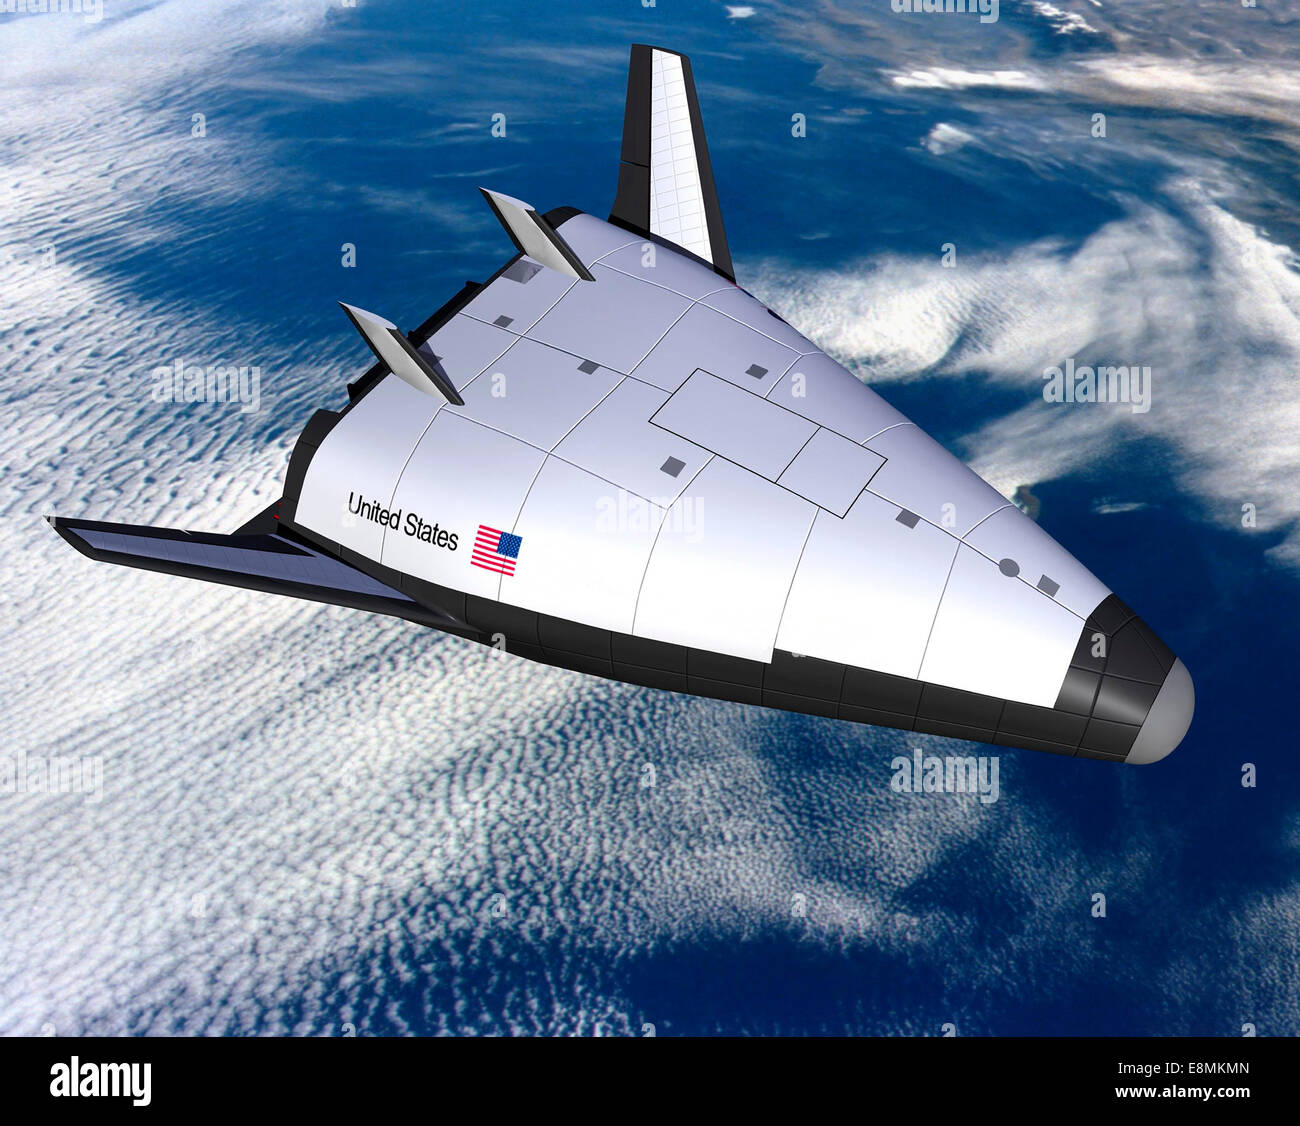 Artist's concept of the NASA/Lockheed Martin Single-Stage-To-Orbit (SSTO) Reusable Launch Vehicle (RLV) in orbit high above the Stock Photo